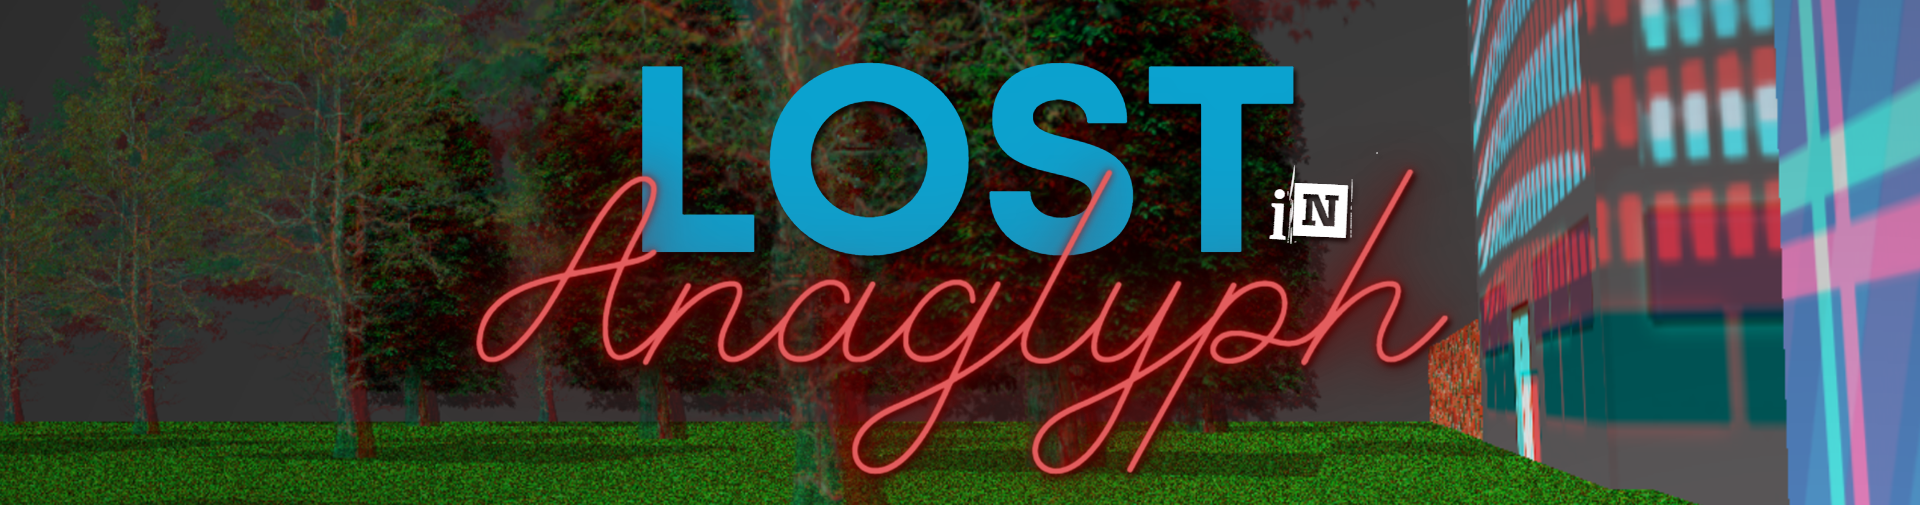 Lost in Anaglyph